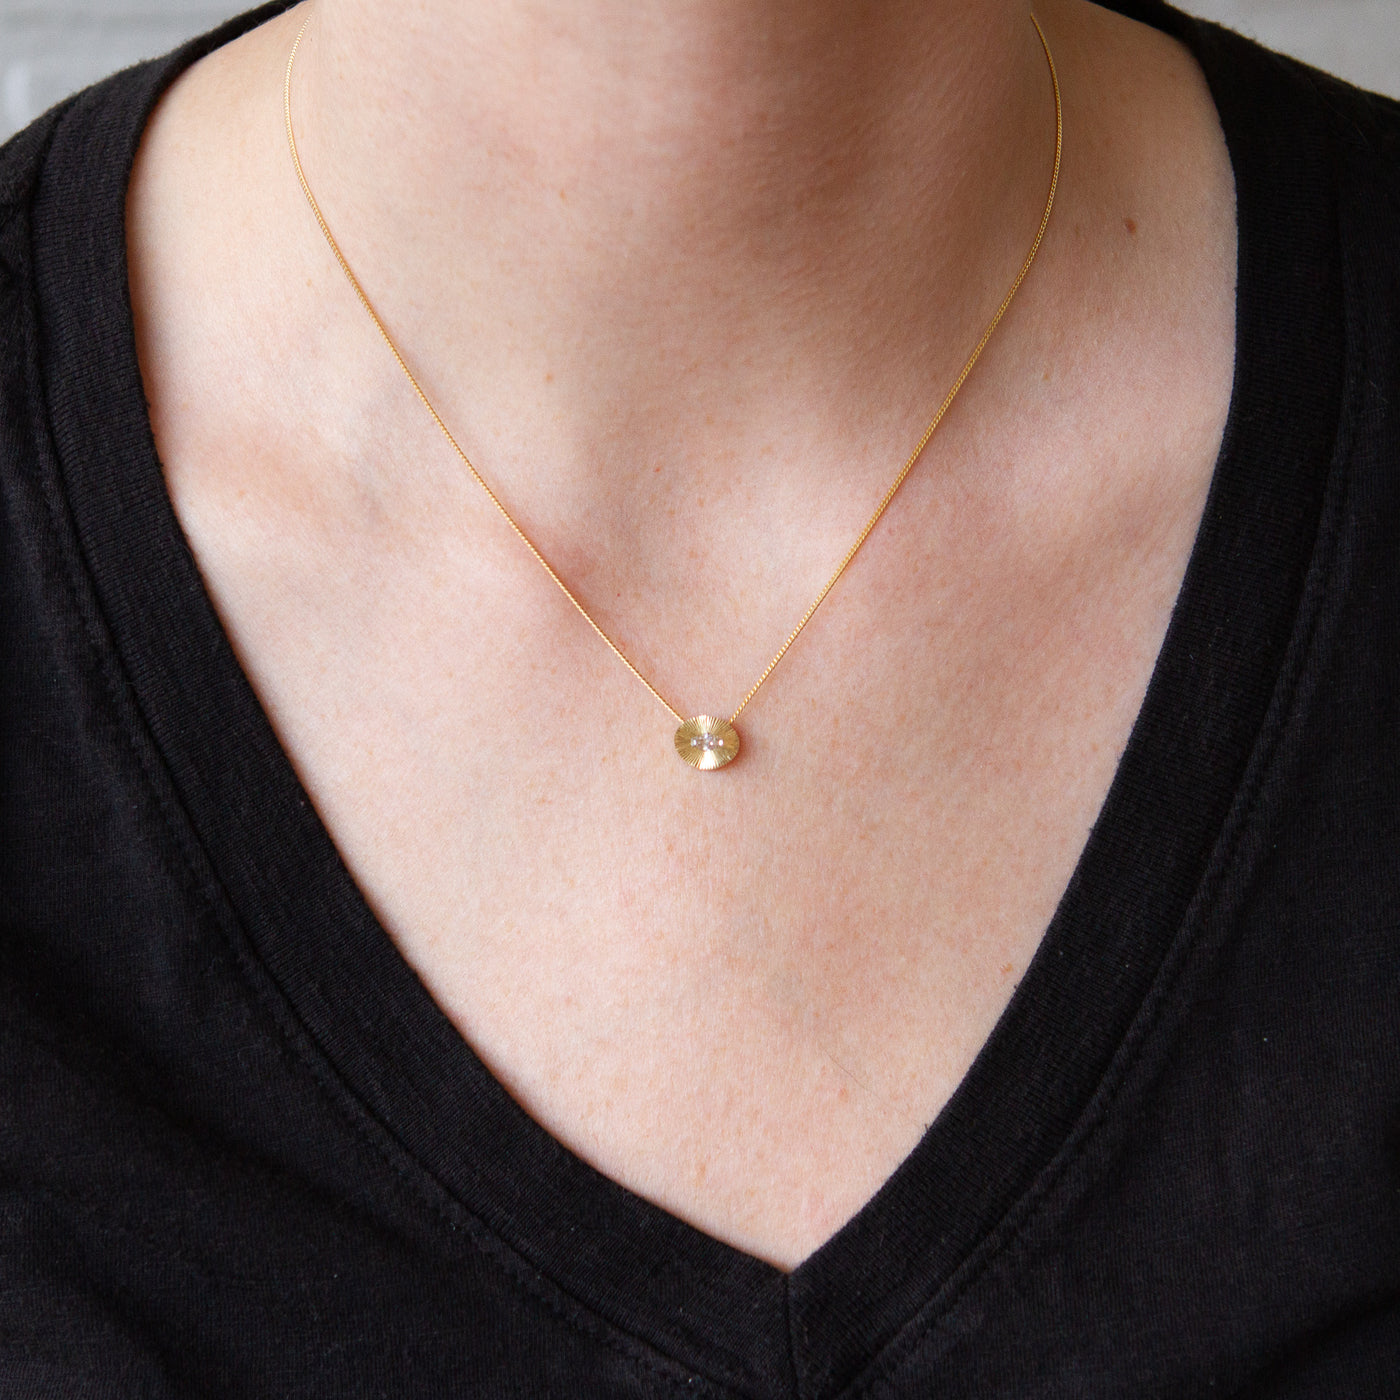 Antique step-cut diamond in a yellow gold oval aurora pendant with engraved rays on an 16" chain around a neck.